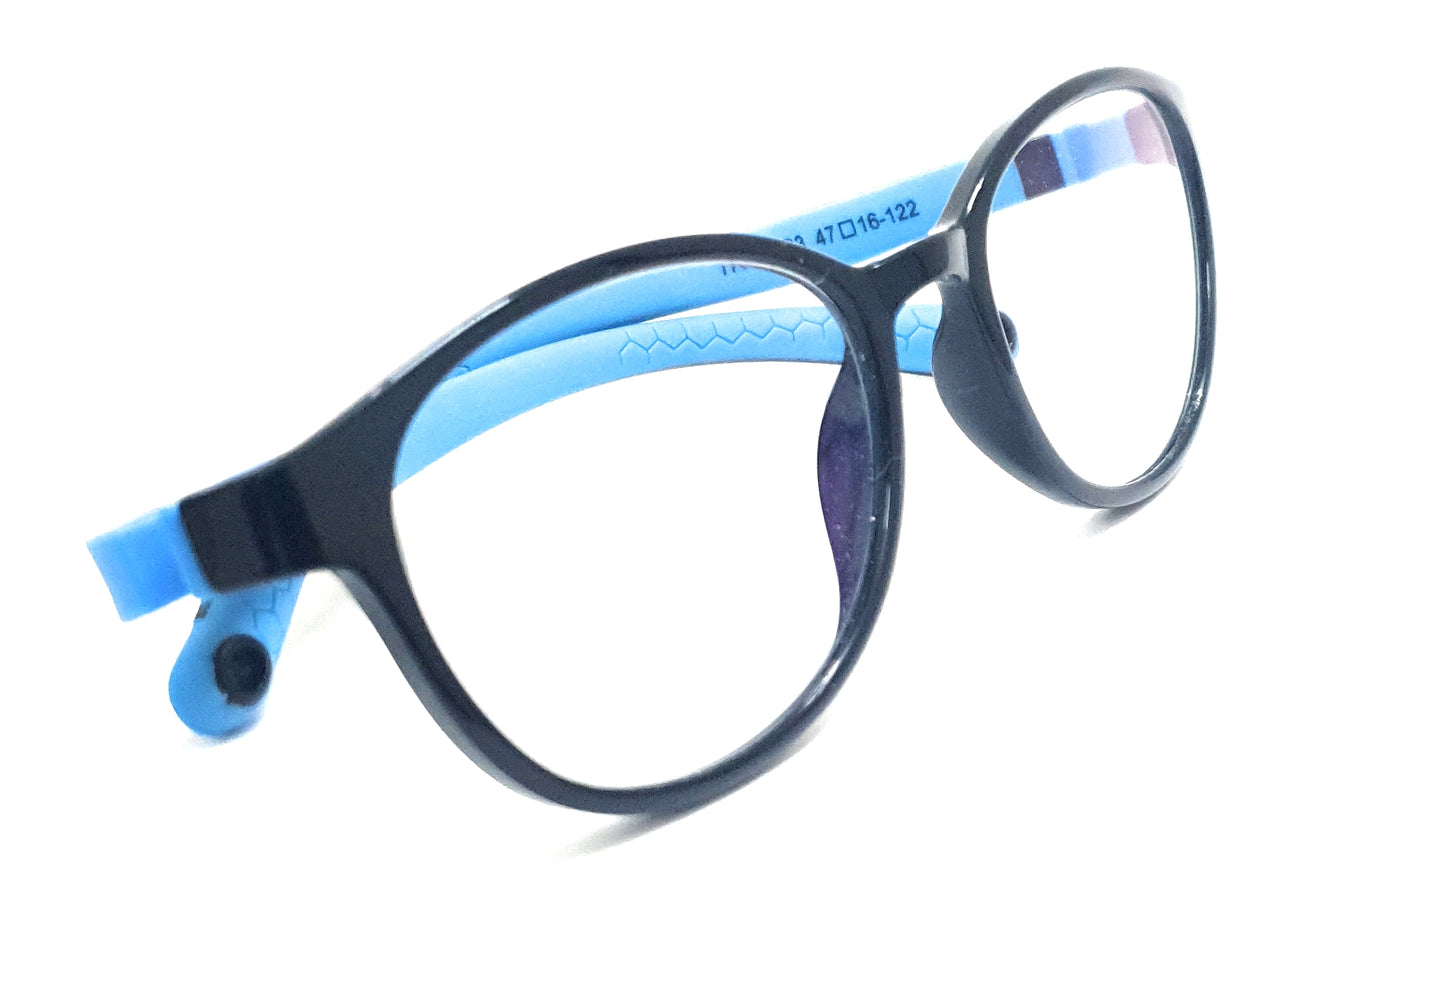 Affaires Kids Blue Light Filter Computer Glasses Flexible Spectacles with anti-reflection for Eye Protection | Zero Power (TR-44) (BC-273) Black-Blue